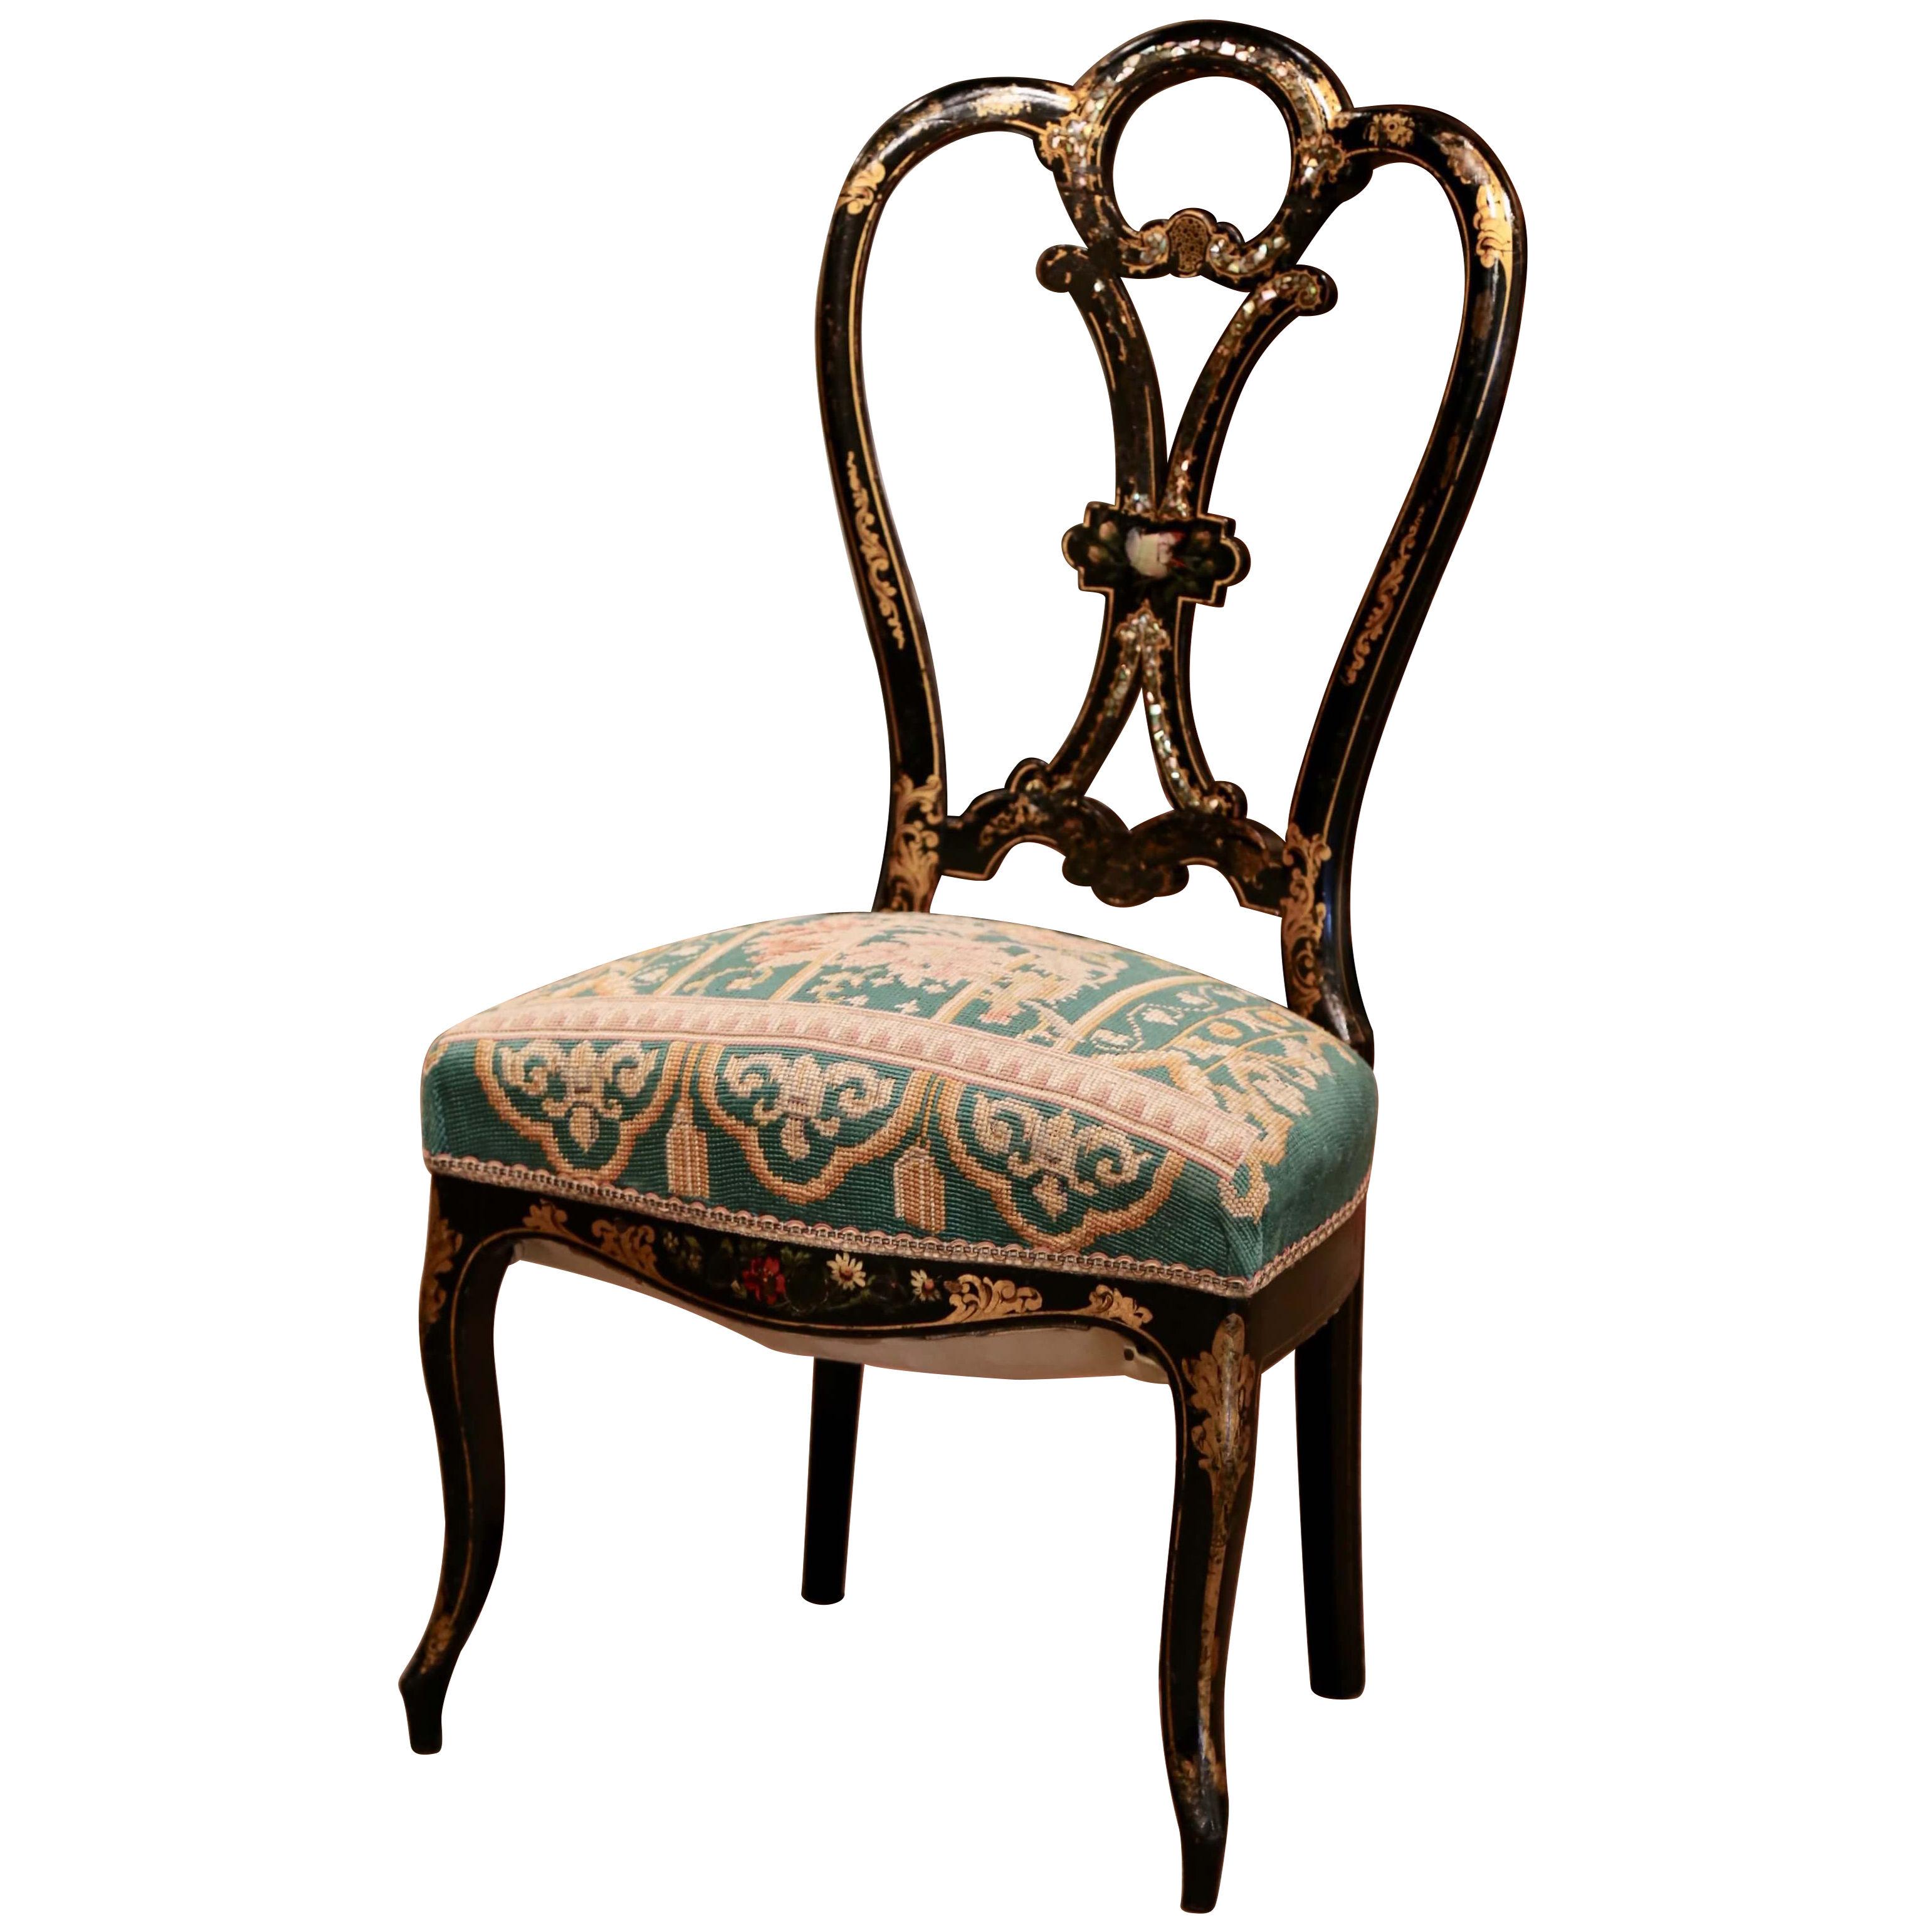 19th Century Napoleon III Black Lacquered and Mother of Peal Ladies Chair